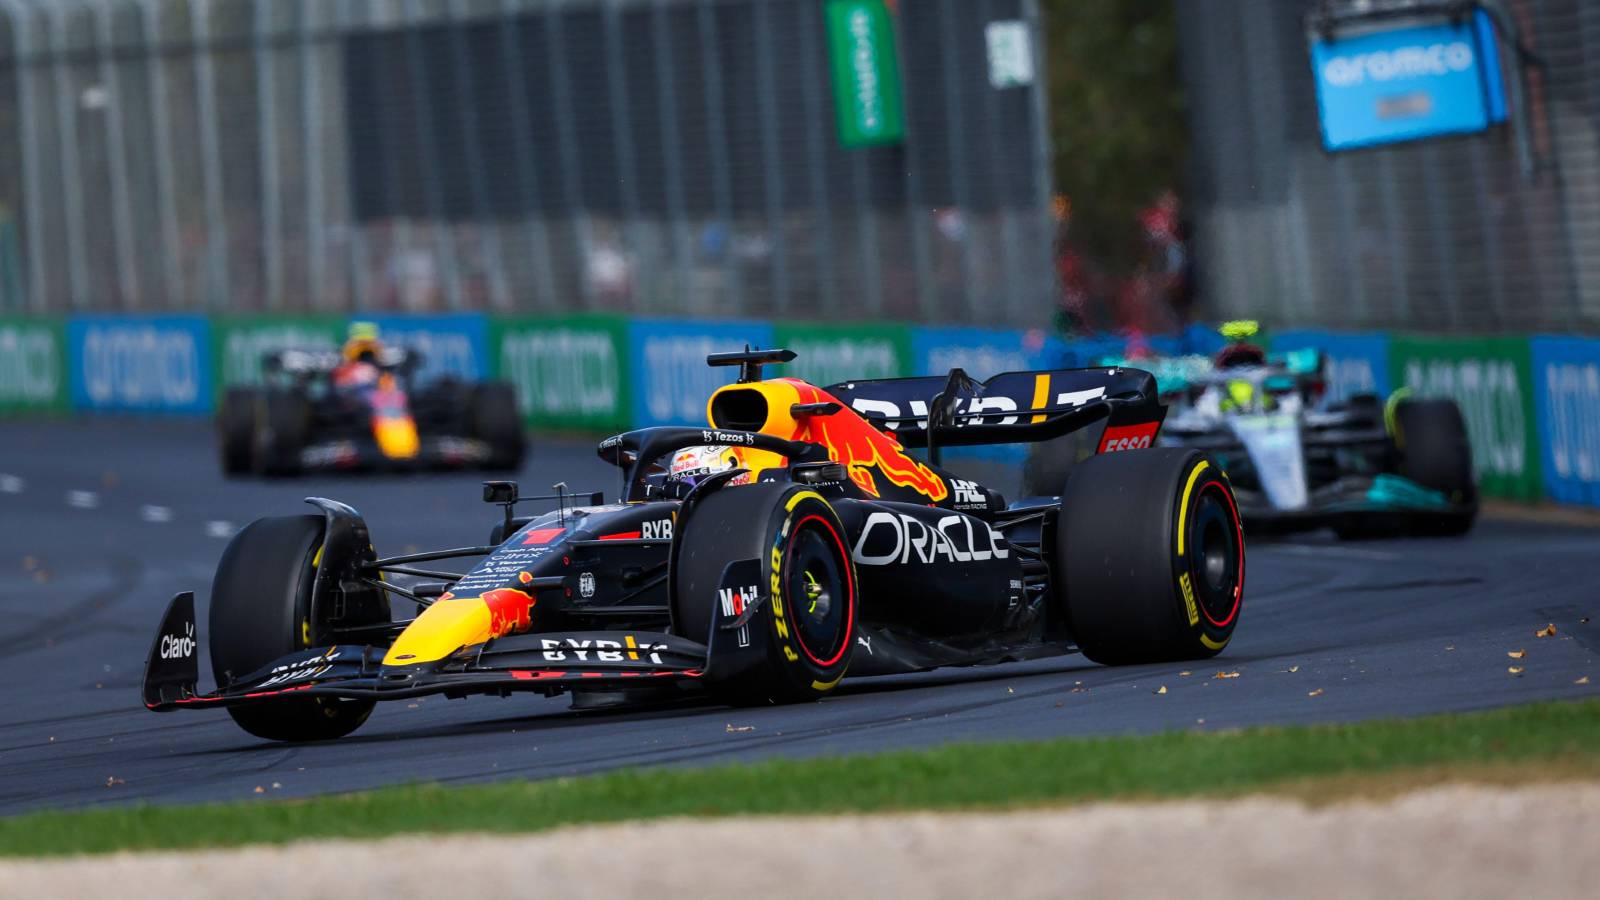 Max Verstappen ahead of a Mercedes and Sergio Perez's Red Bull. Melbourne April 2022.